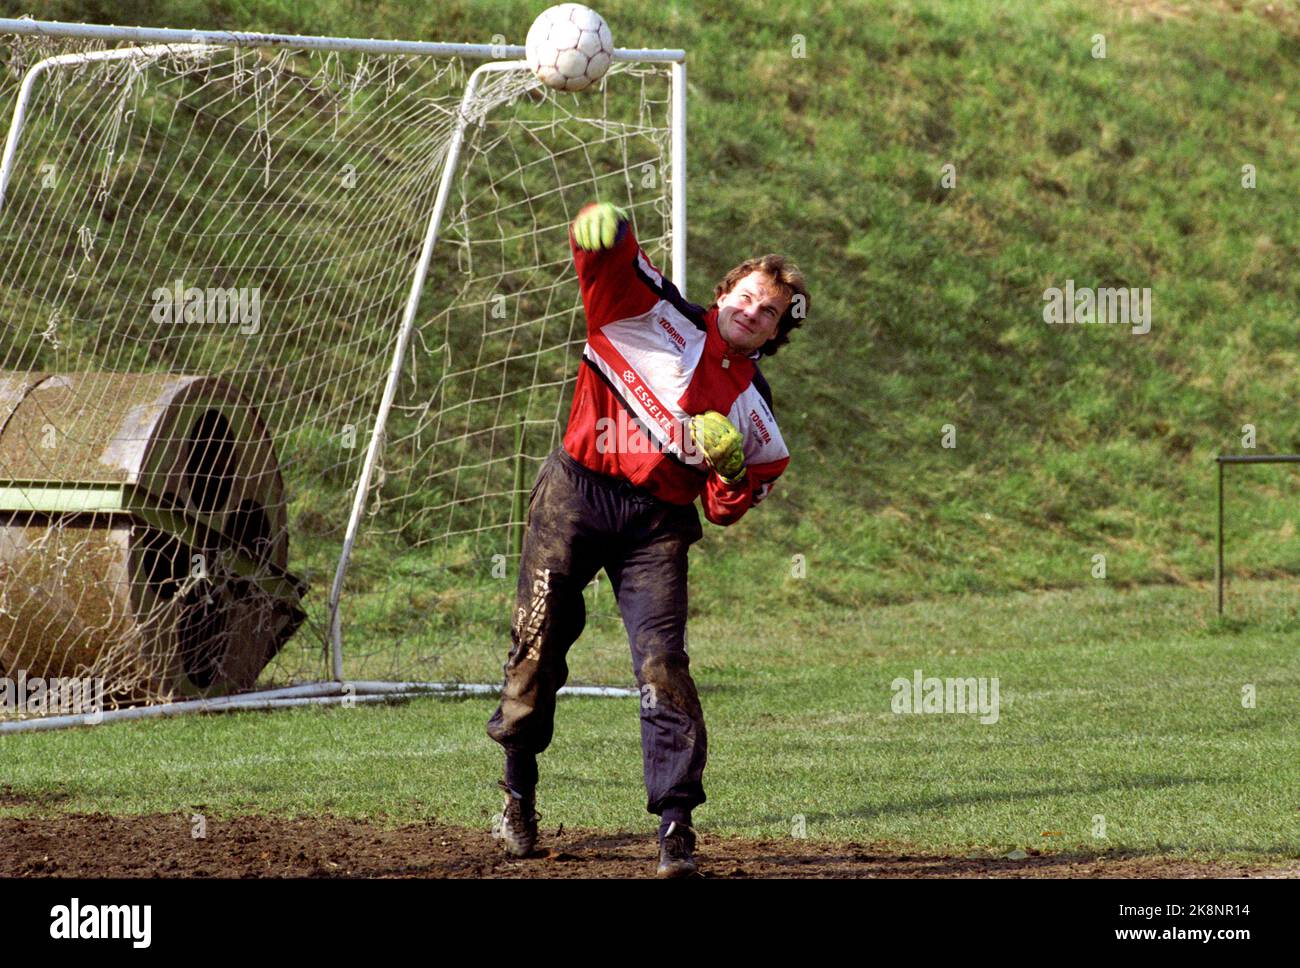 Szombatheli, Hungary 19911029. Footballer Frode Grodås in front of the European qualifying match. The match Hungary - Norway ended 0-0. Photo: Calle Tørnstrøm / NTB / NTB Stock Photo